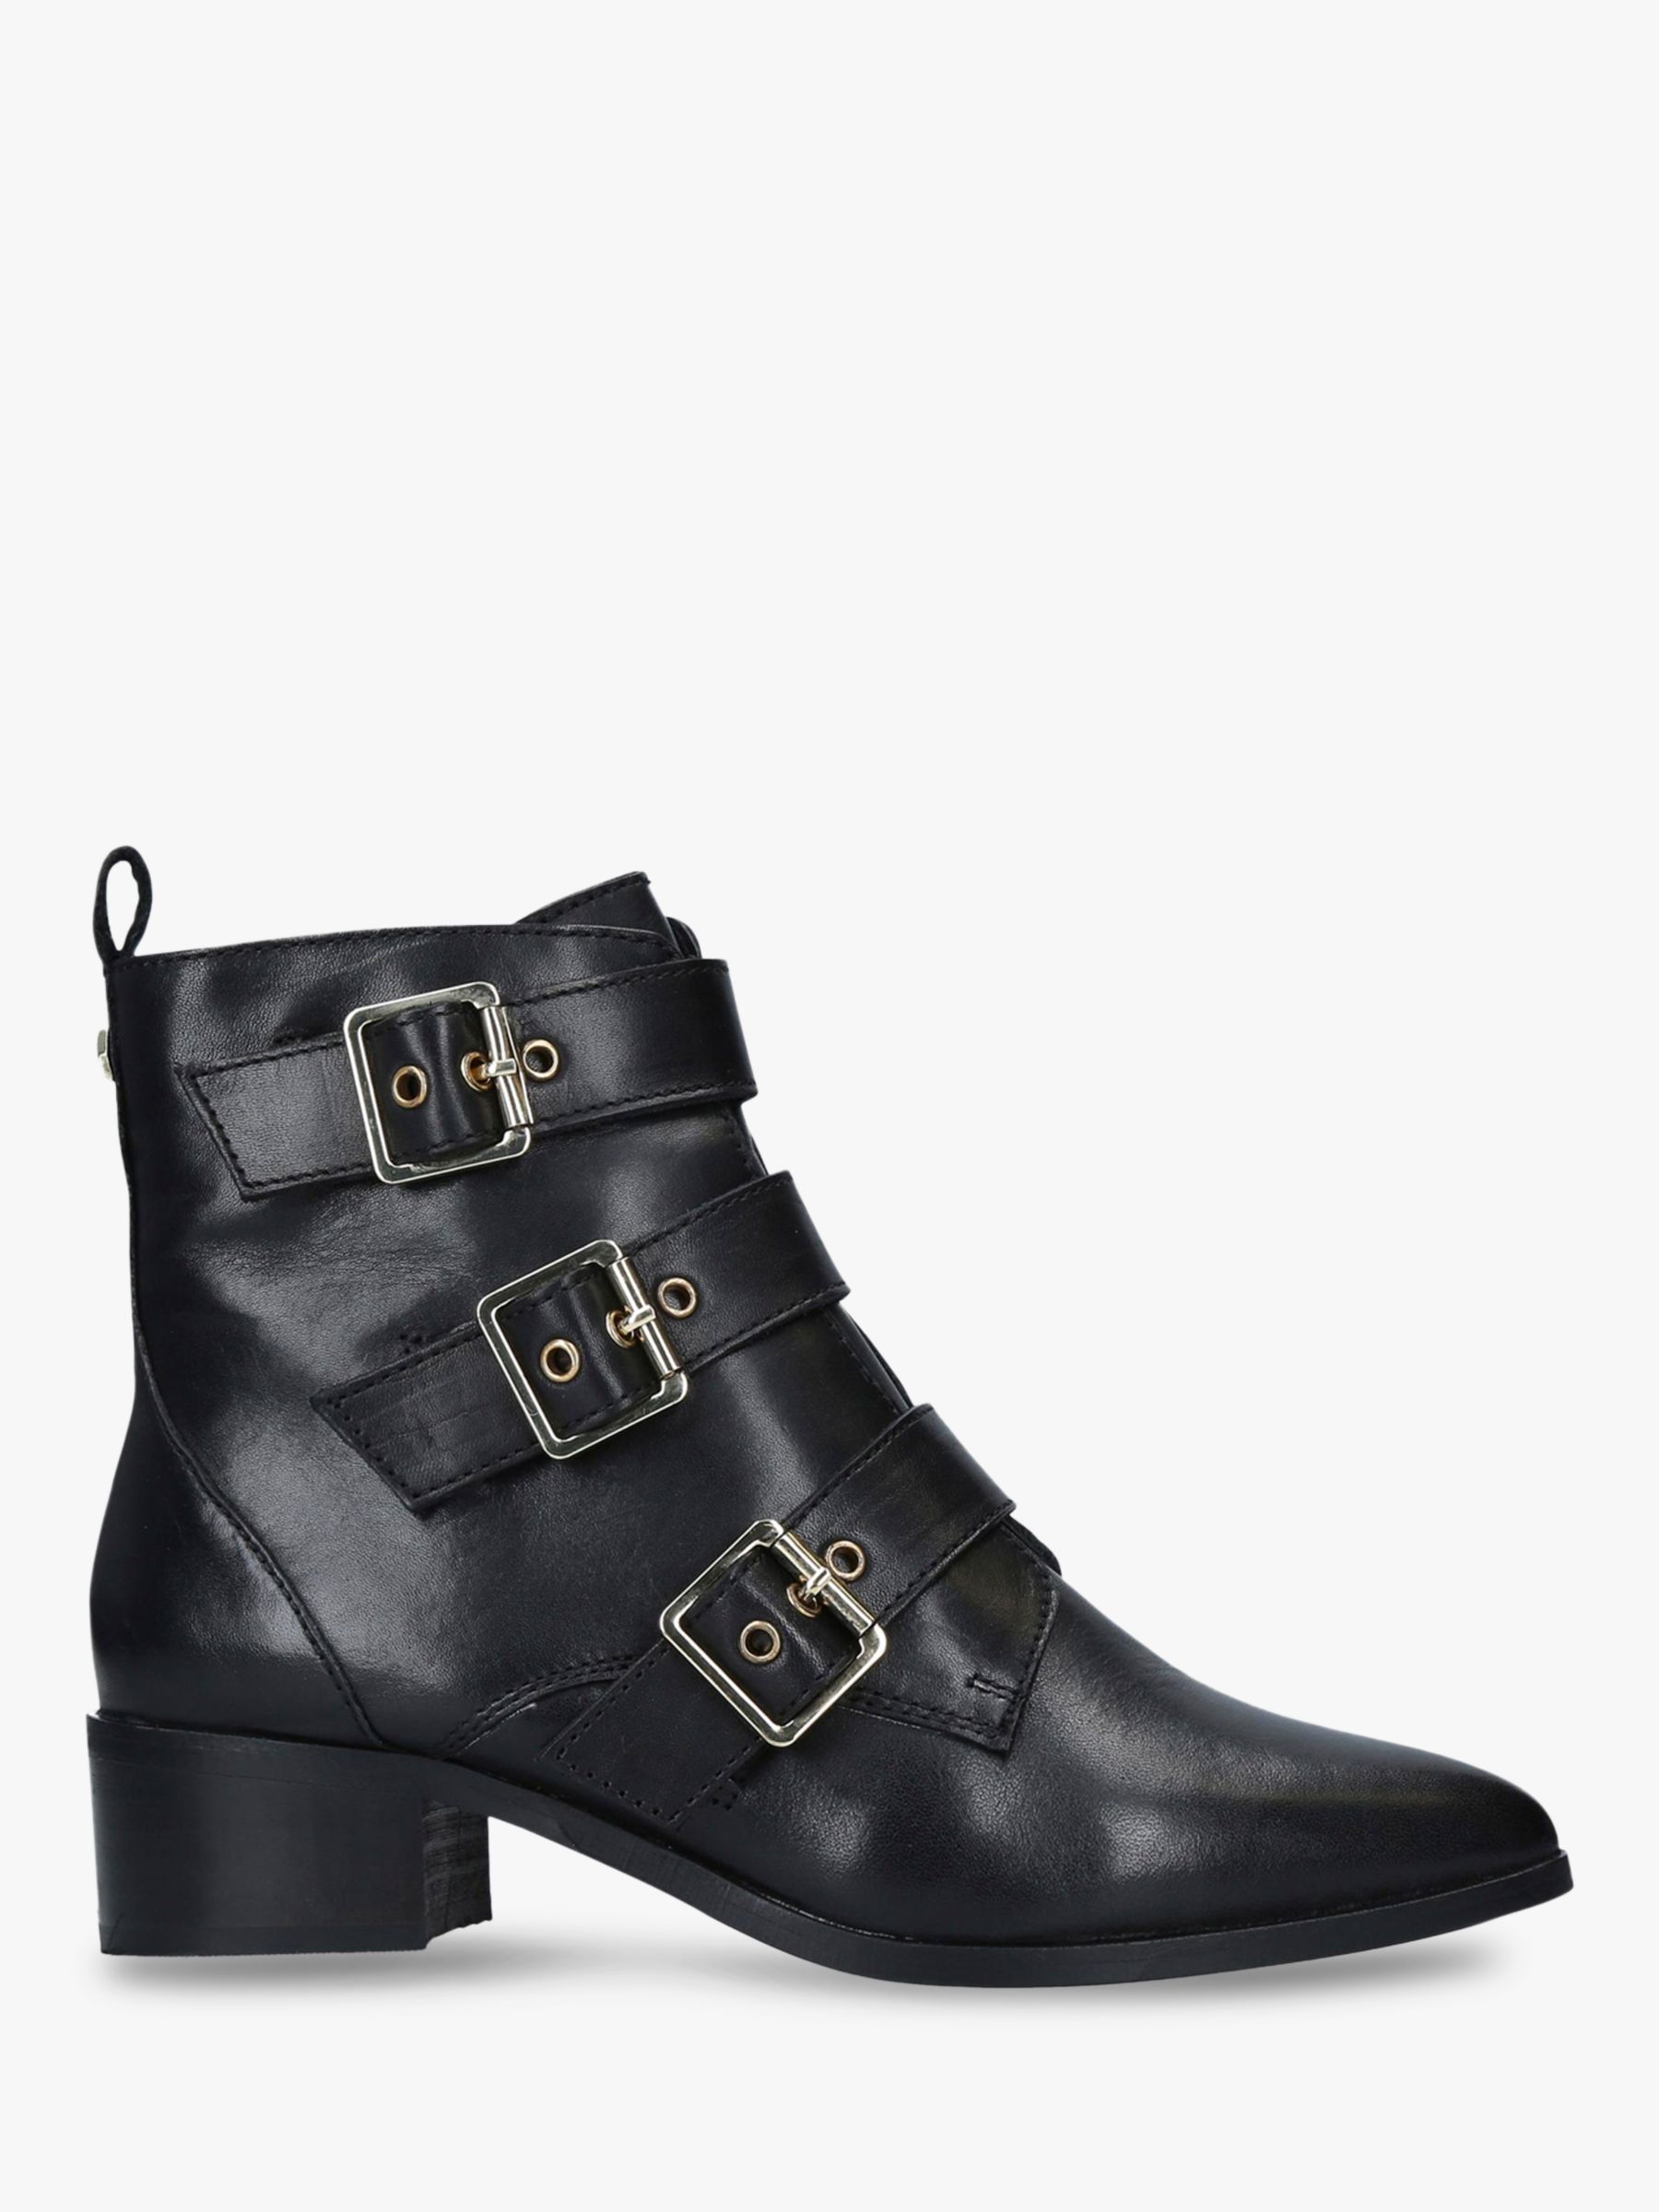 Carvela Toy Buckle Leather Ankle Boots, Black